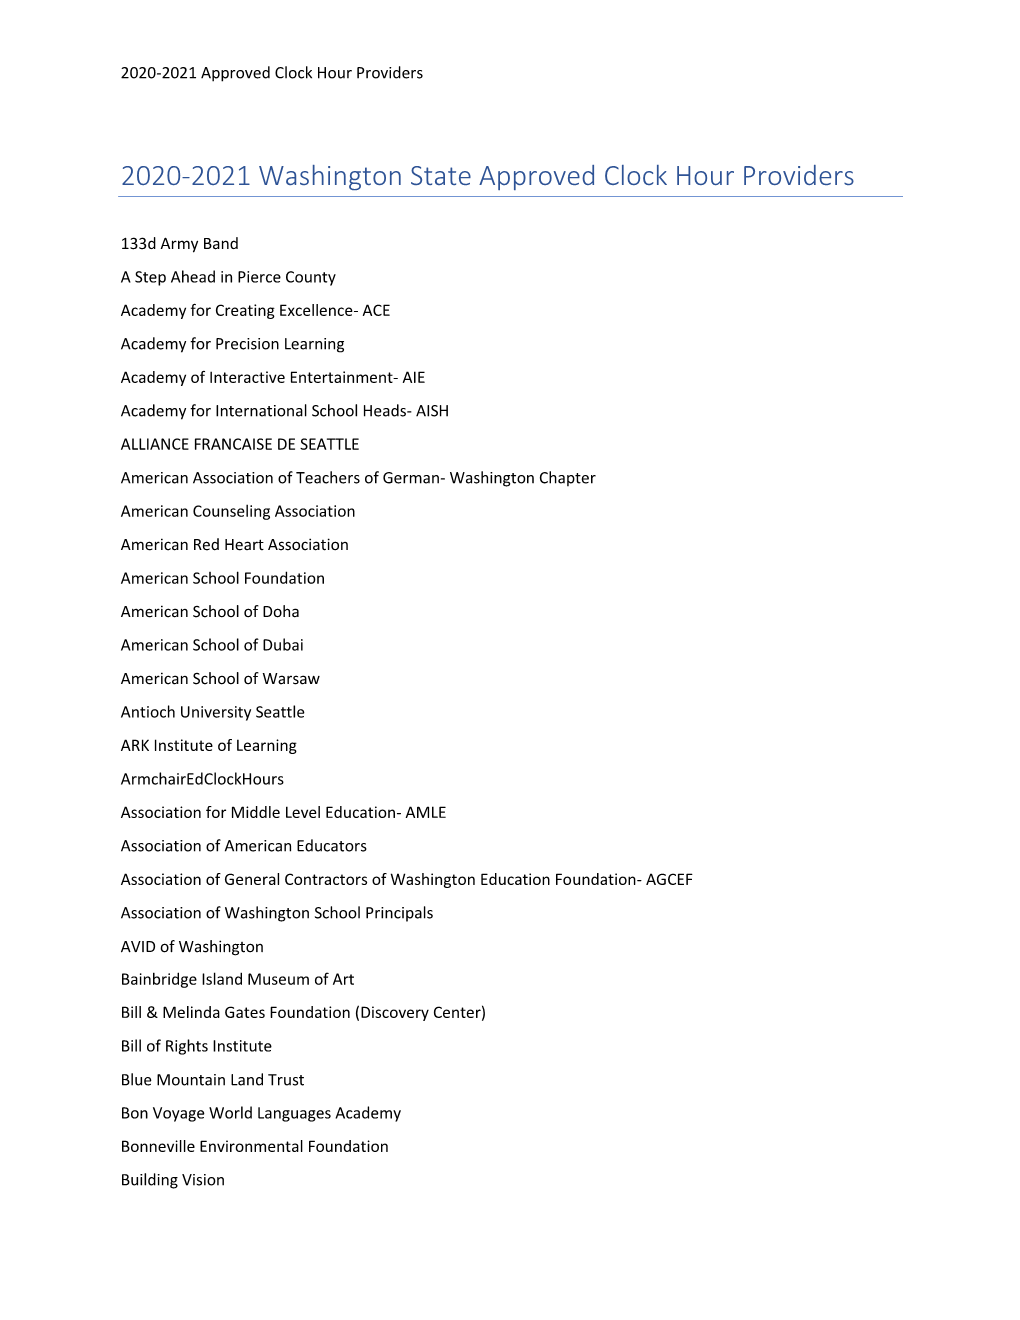 2020-2021 Washington State Approved Clock Hour Providers